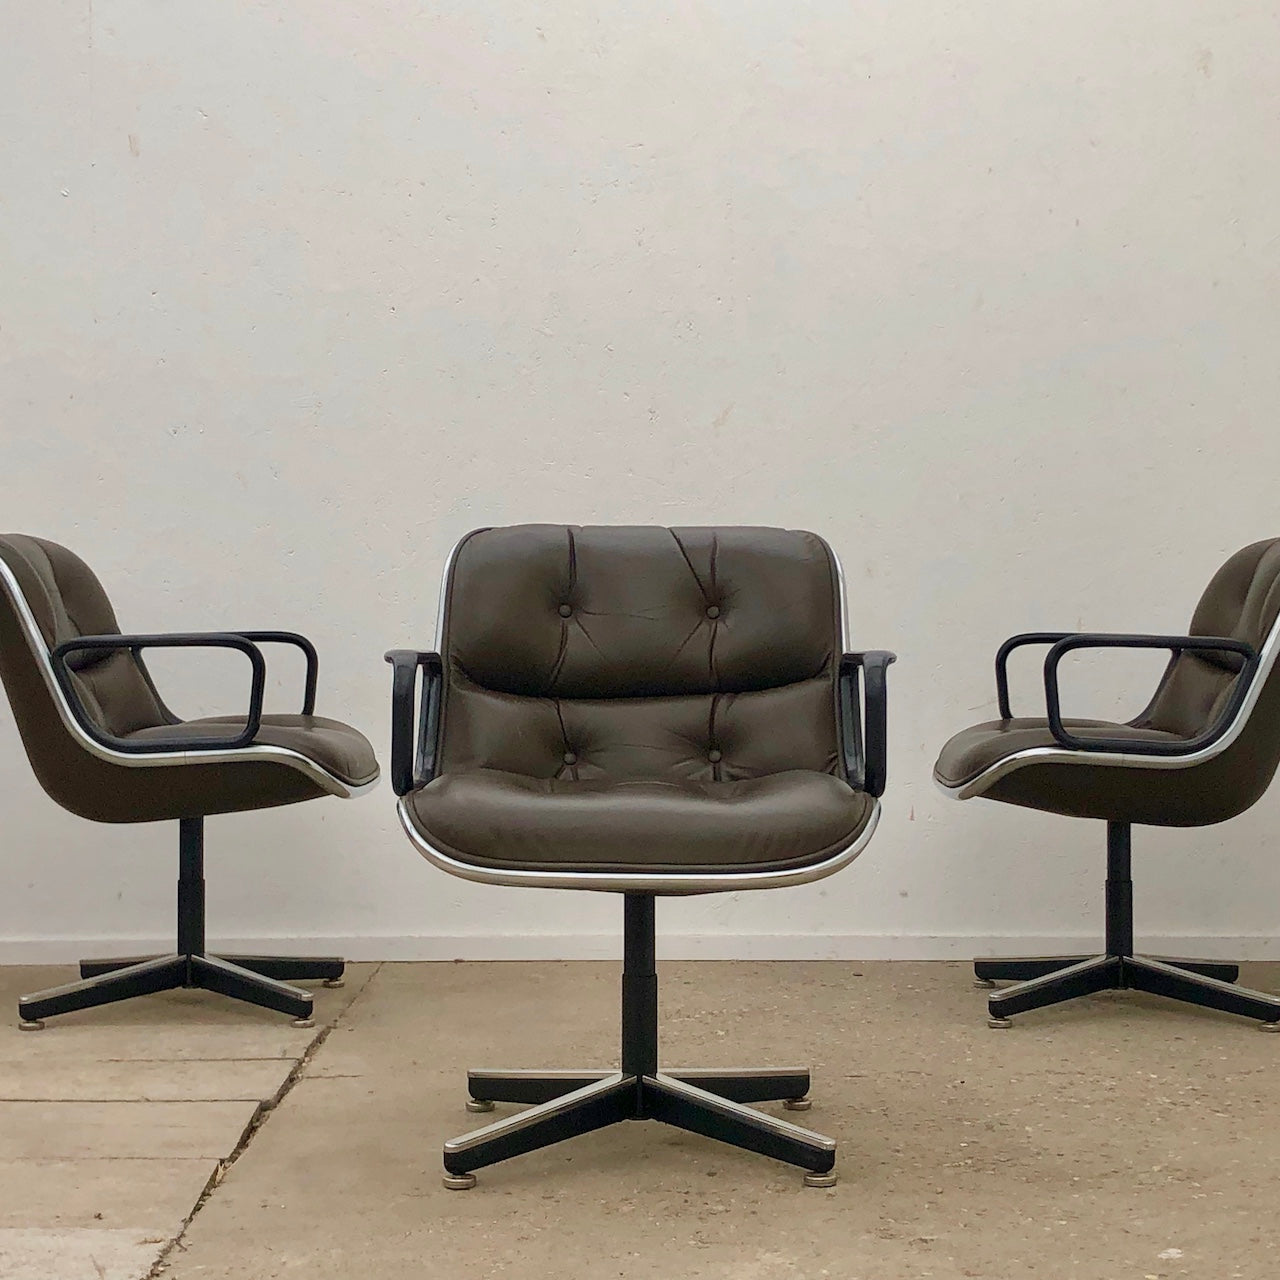 Executive office chairs by Charles Pollock for Knoll International